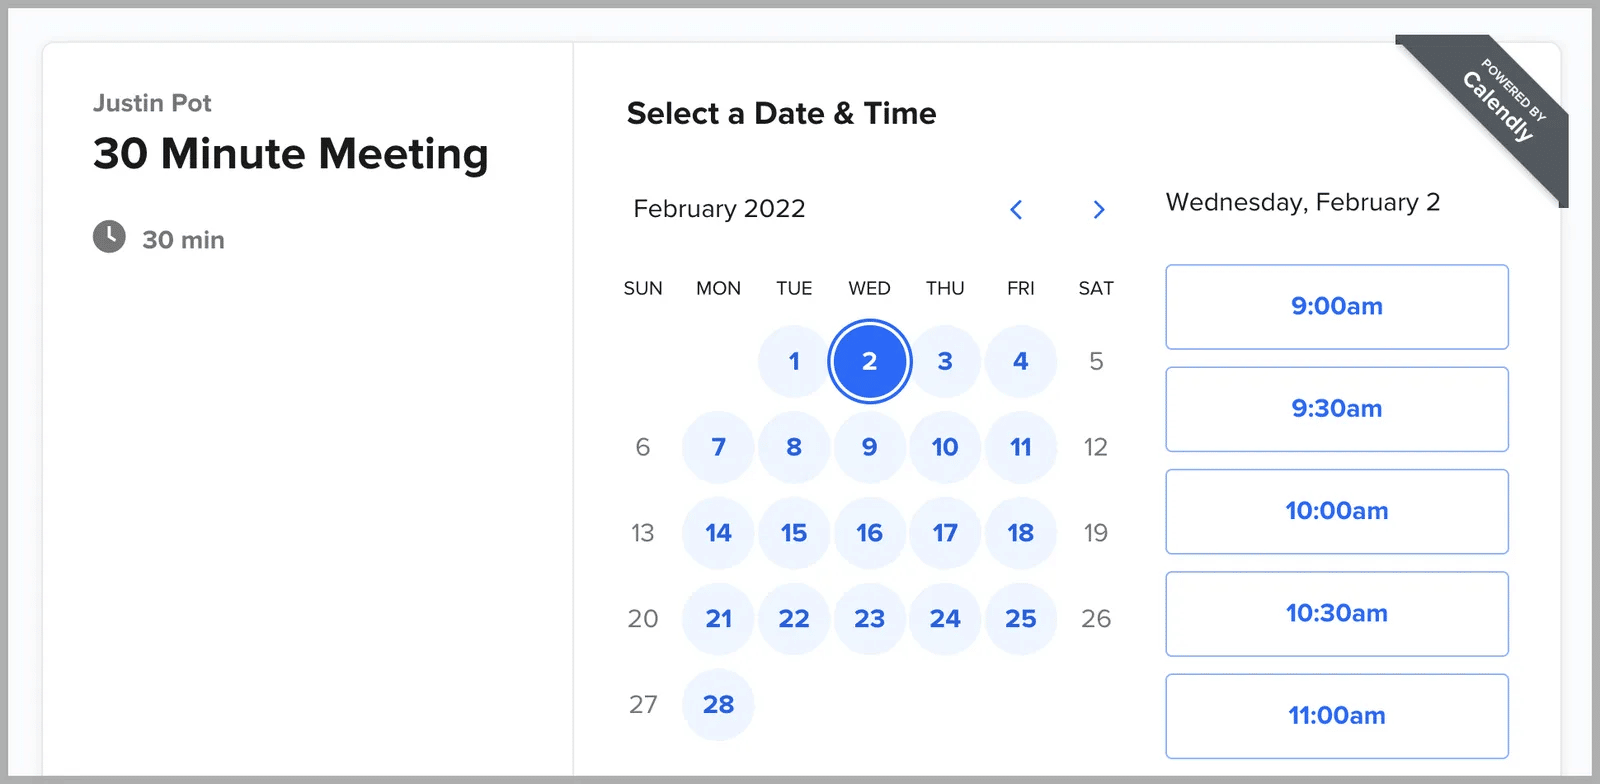 A screenshot of the Calendly meeting scheduling portal